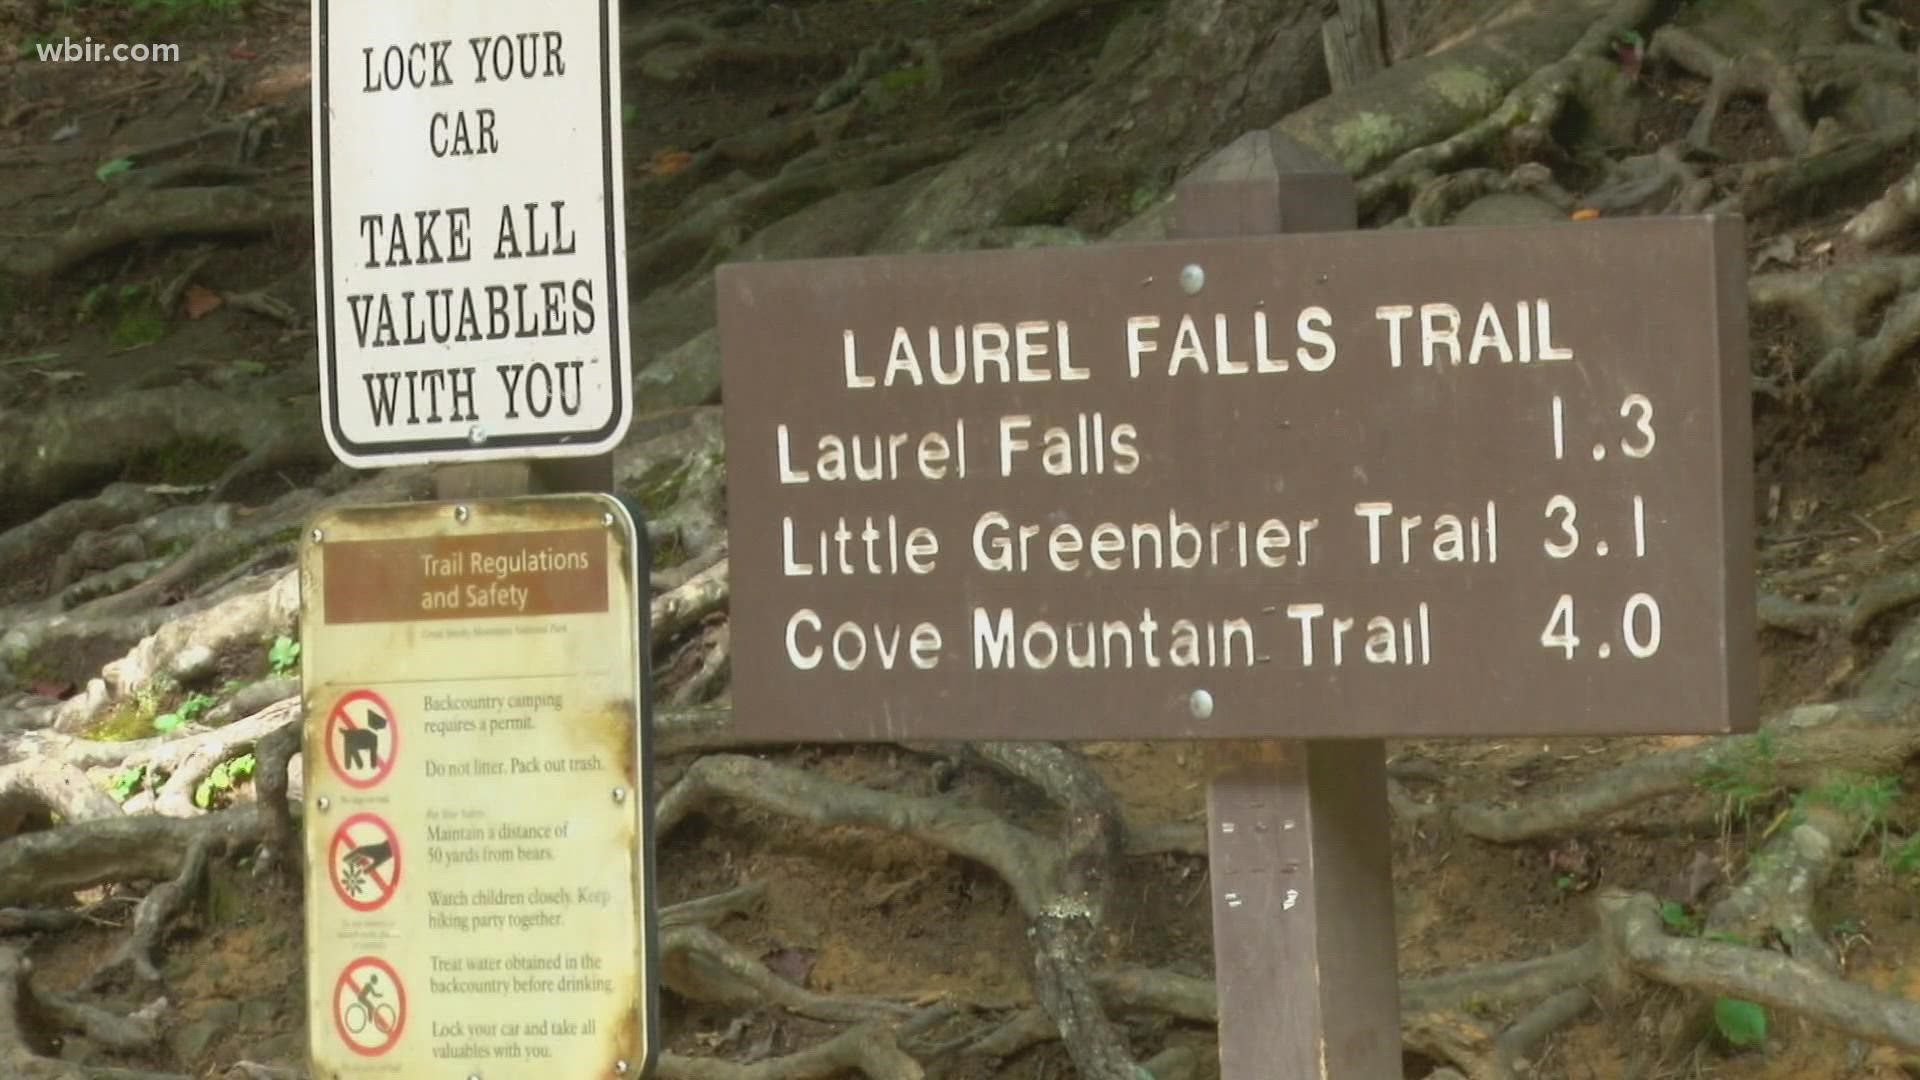 As of Tuesday, Laurel Falls will only allow parking by reservation and visitors will need to pay $14 per car.